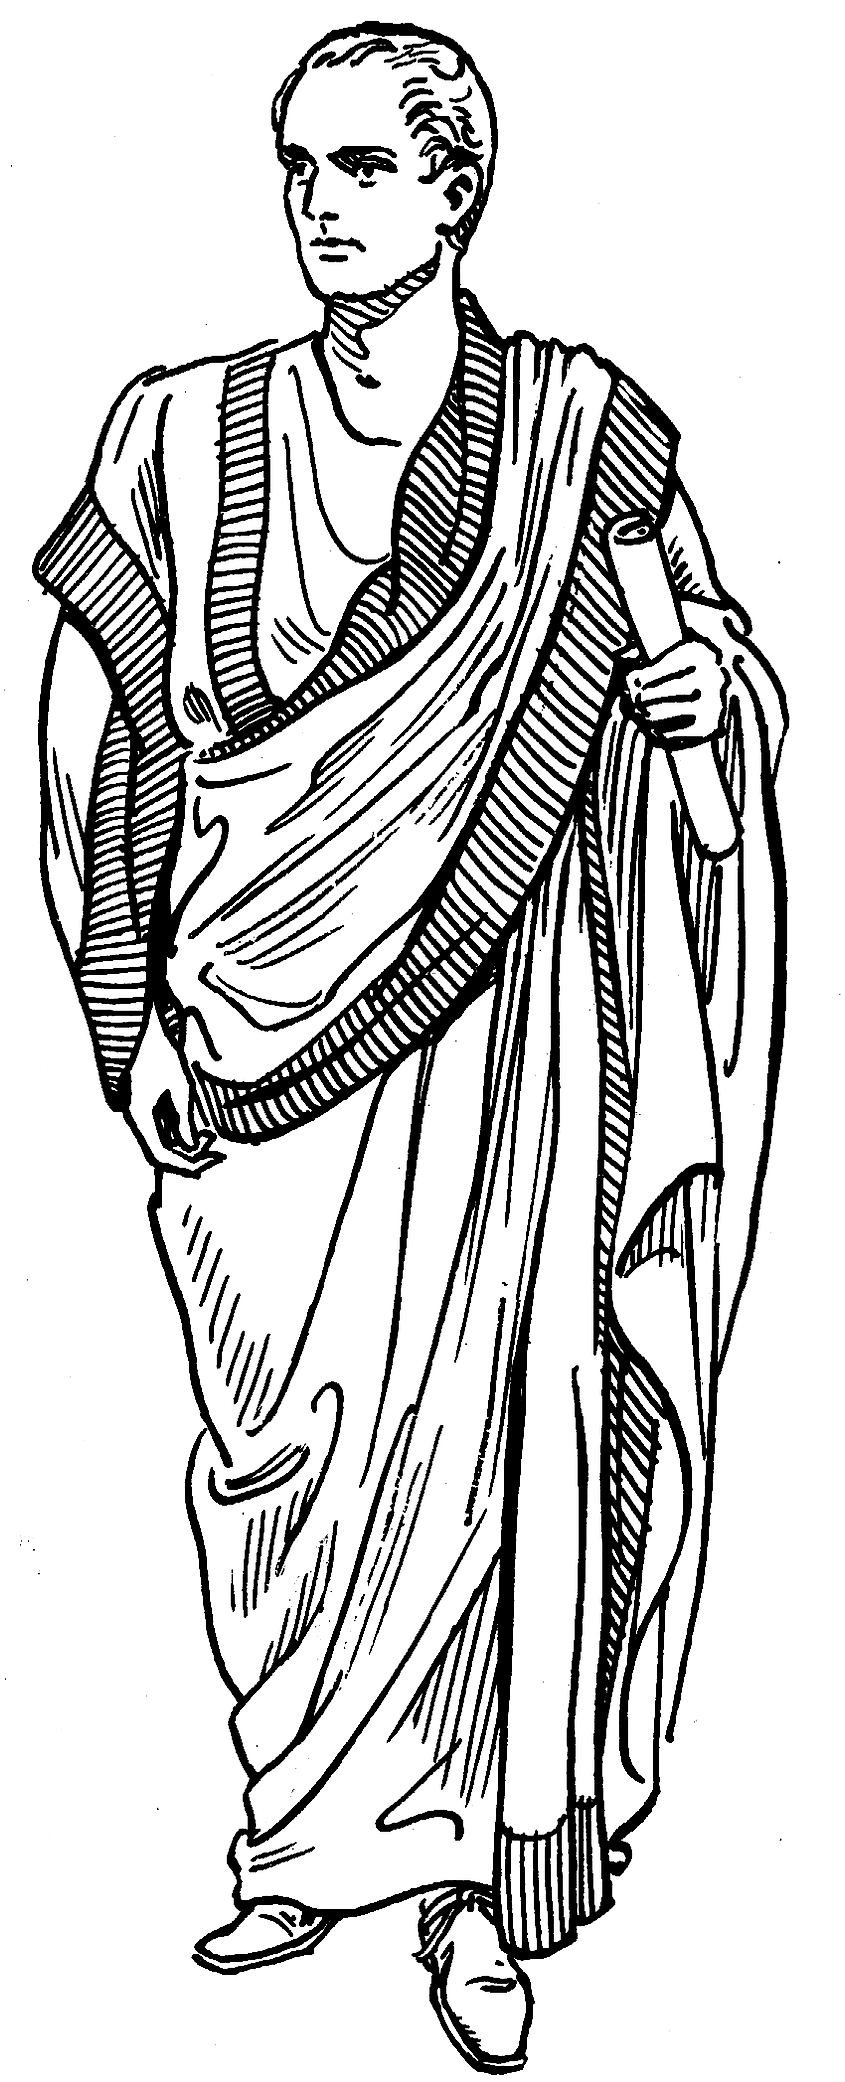 Toga. In Wikipedia. https://en.wikipedia.org/wiki/Toga By Pearson Scott Foresman - This file has been extracted from another file, Public Domain, https://commons.wikimedia.org/w/index.php?curid=3162343